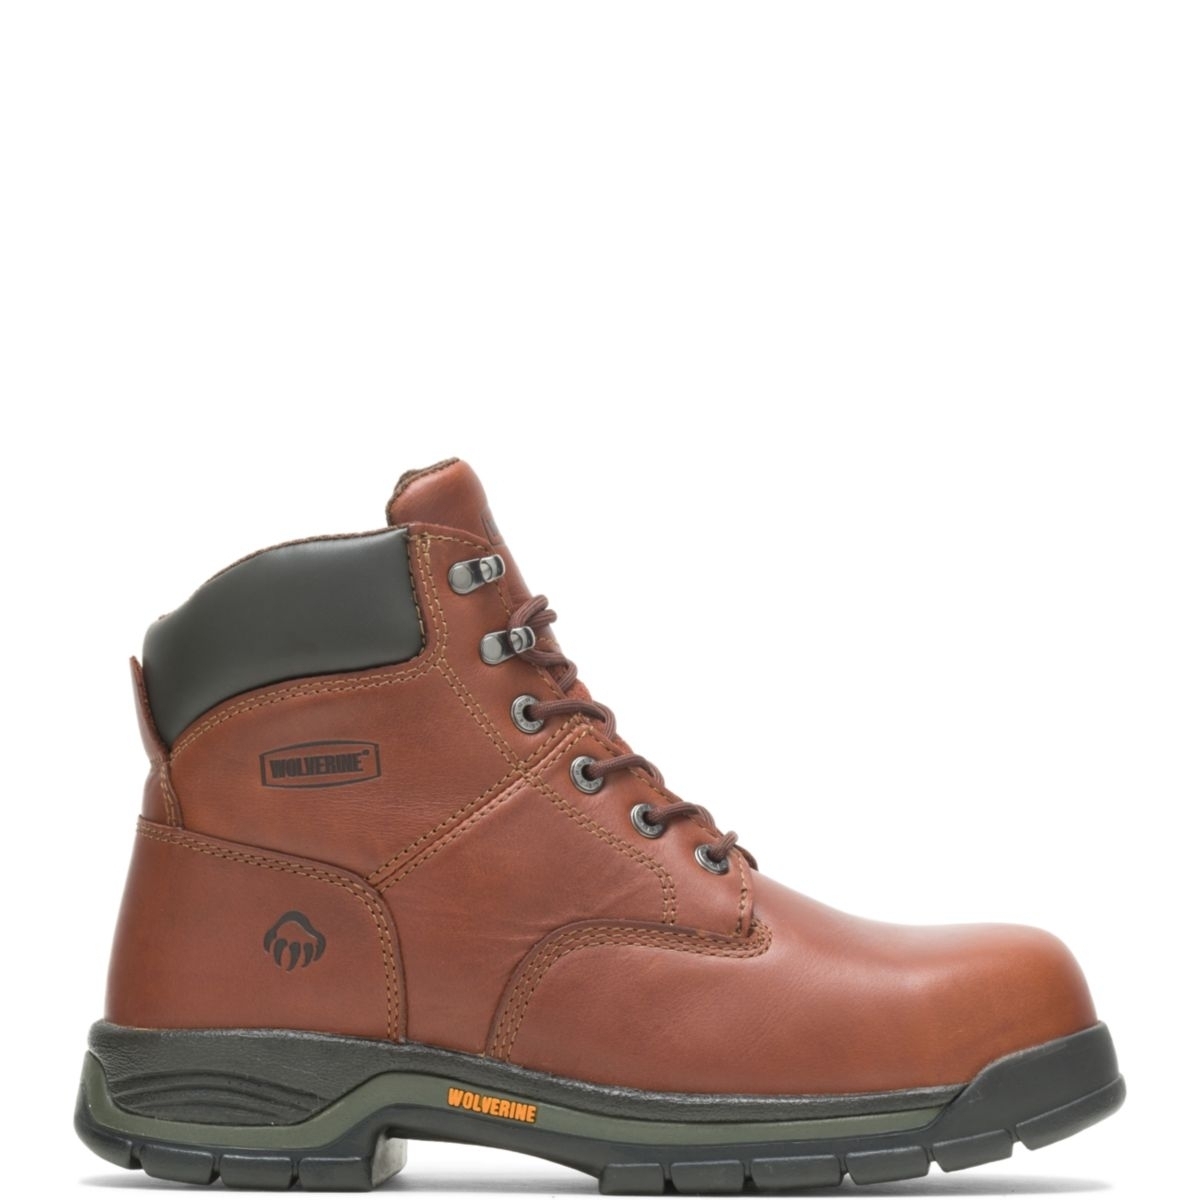 WOLVERINE Men's Harrison 6 Lace-Up SoftToe Work Boot Brown - W04906 Varies BROWN - BROWN, 16